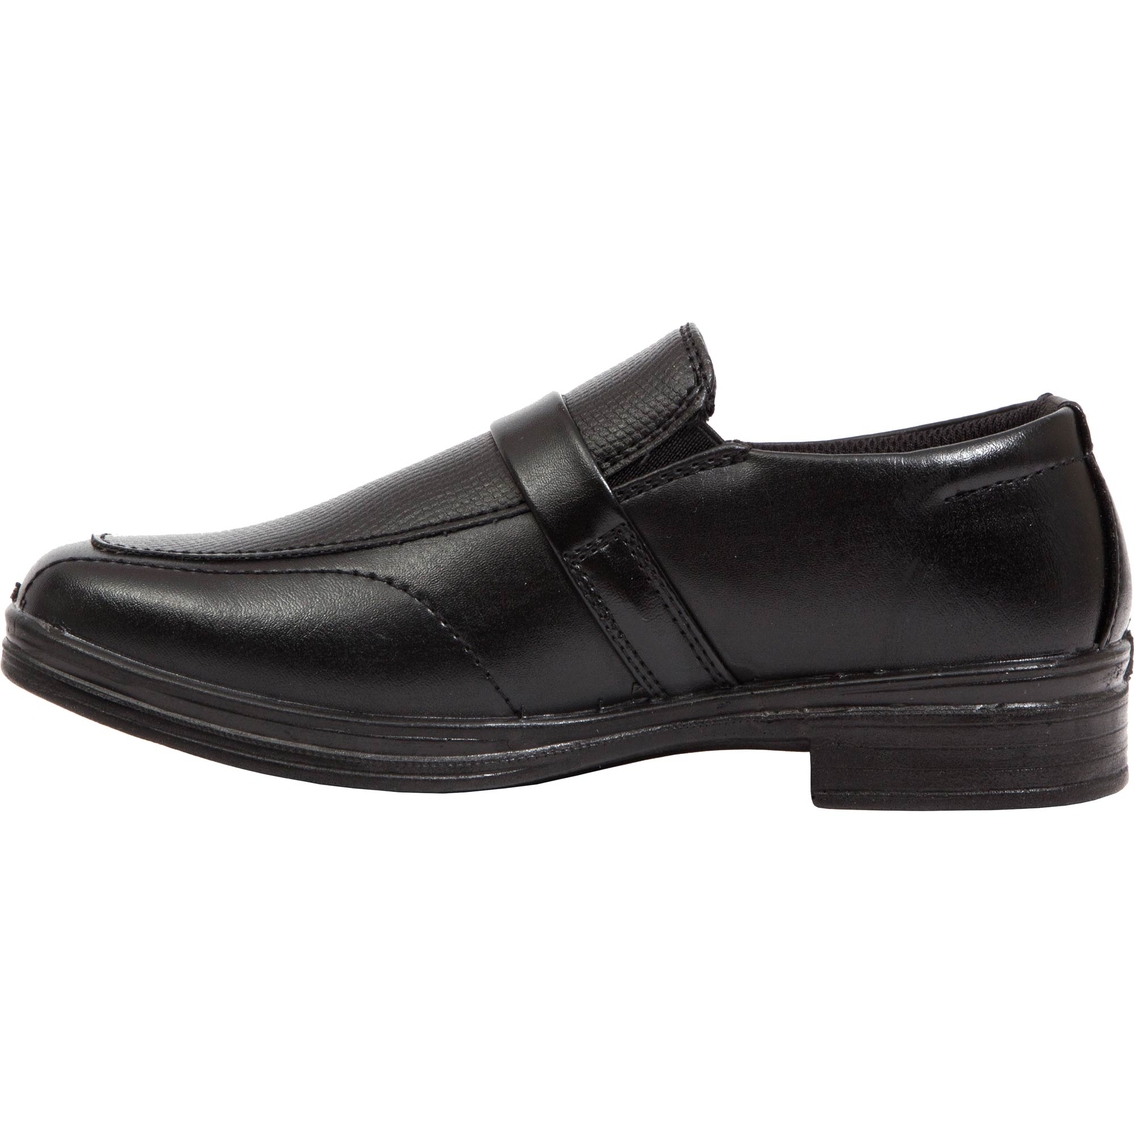 Deer Stags Boys Bold Dress Slip On Shoes - Image 3 of 6